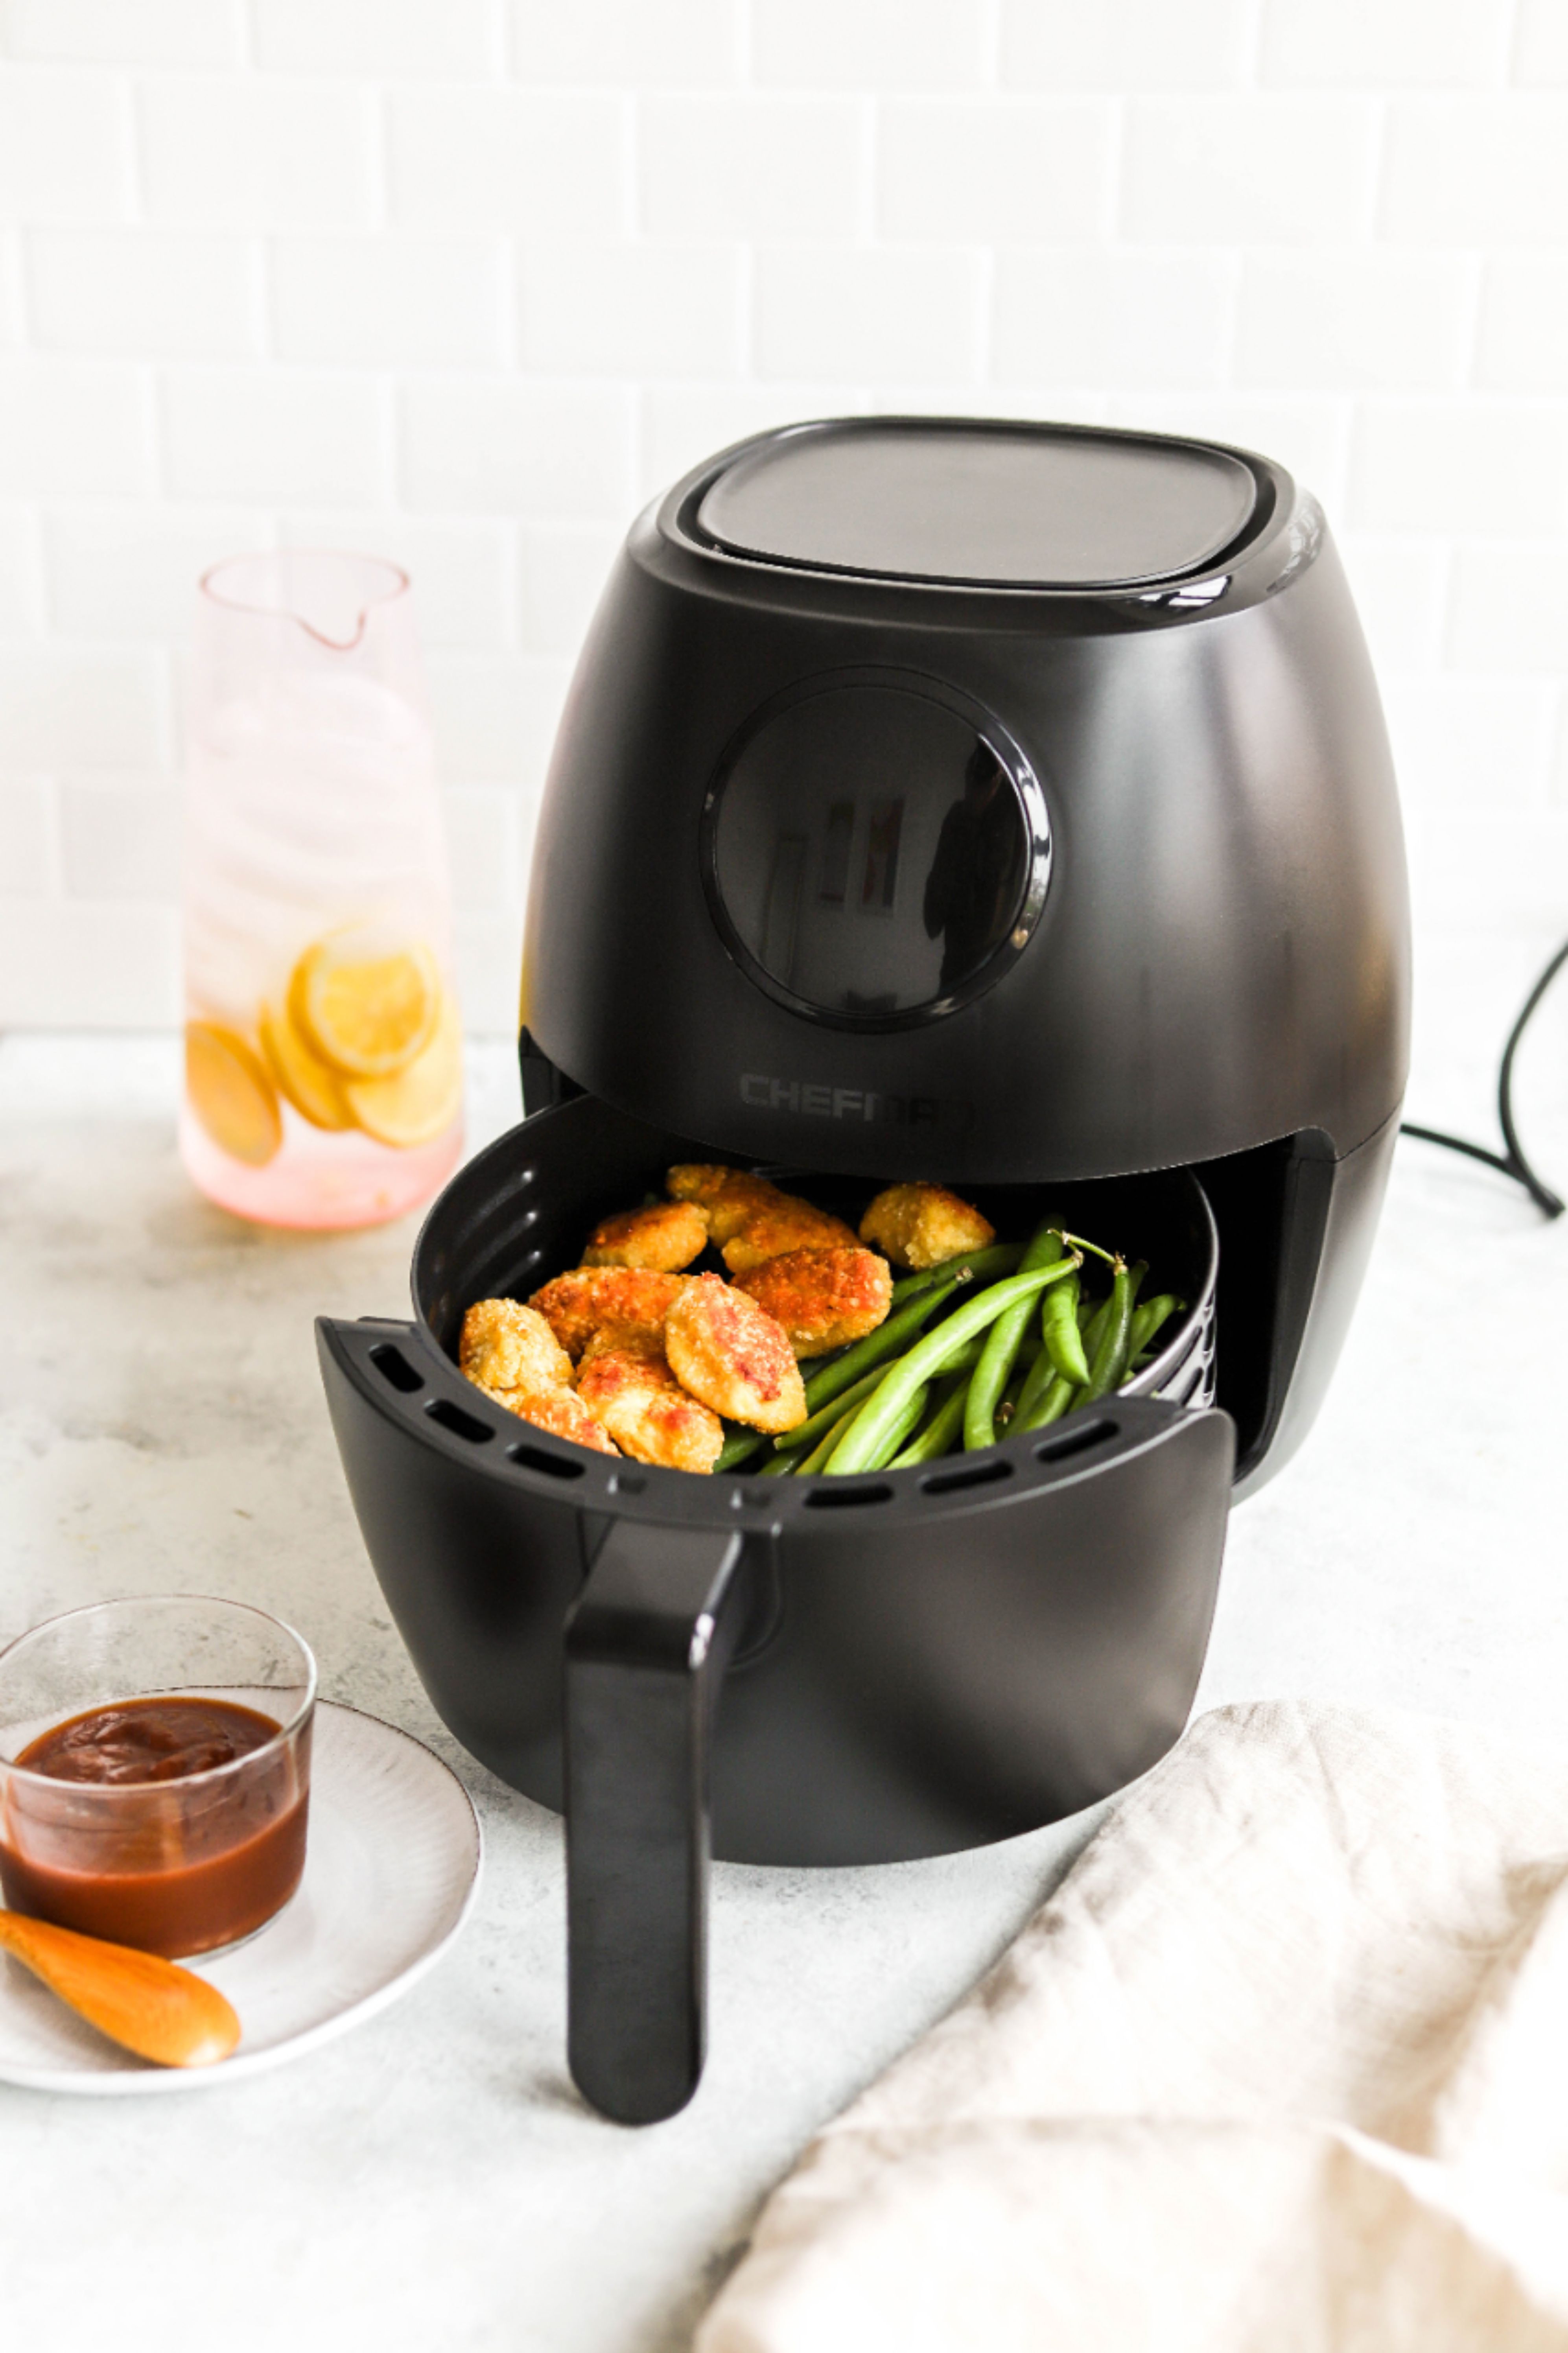 5 Qt. TurboFry Touch Window Air Fryer